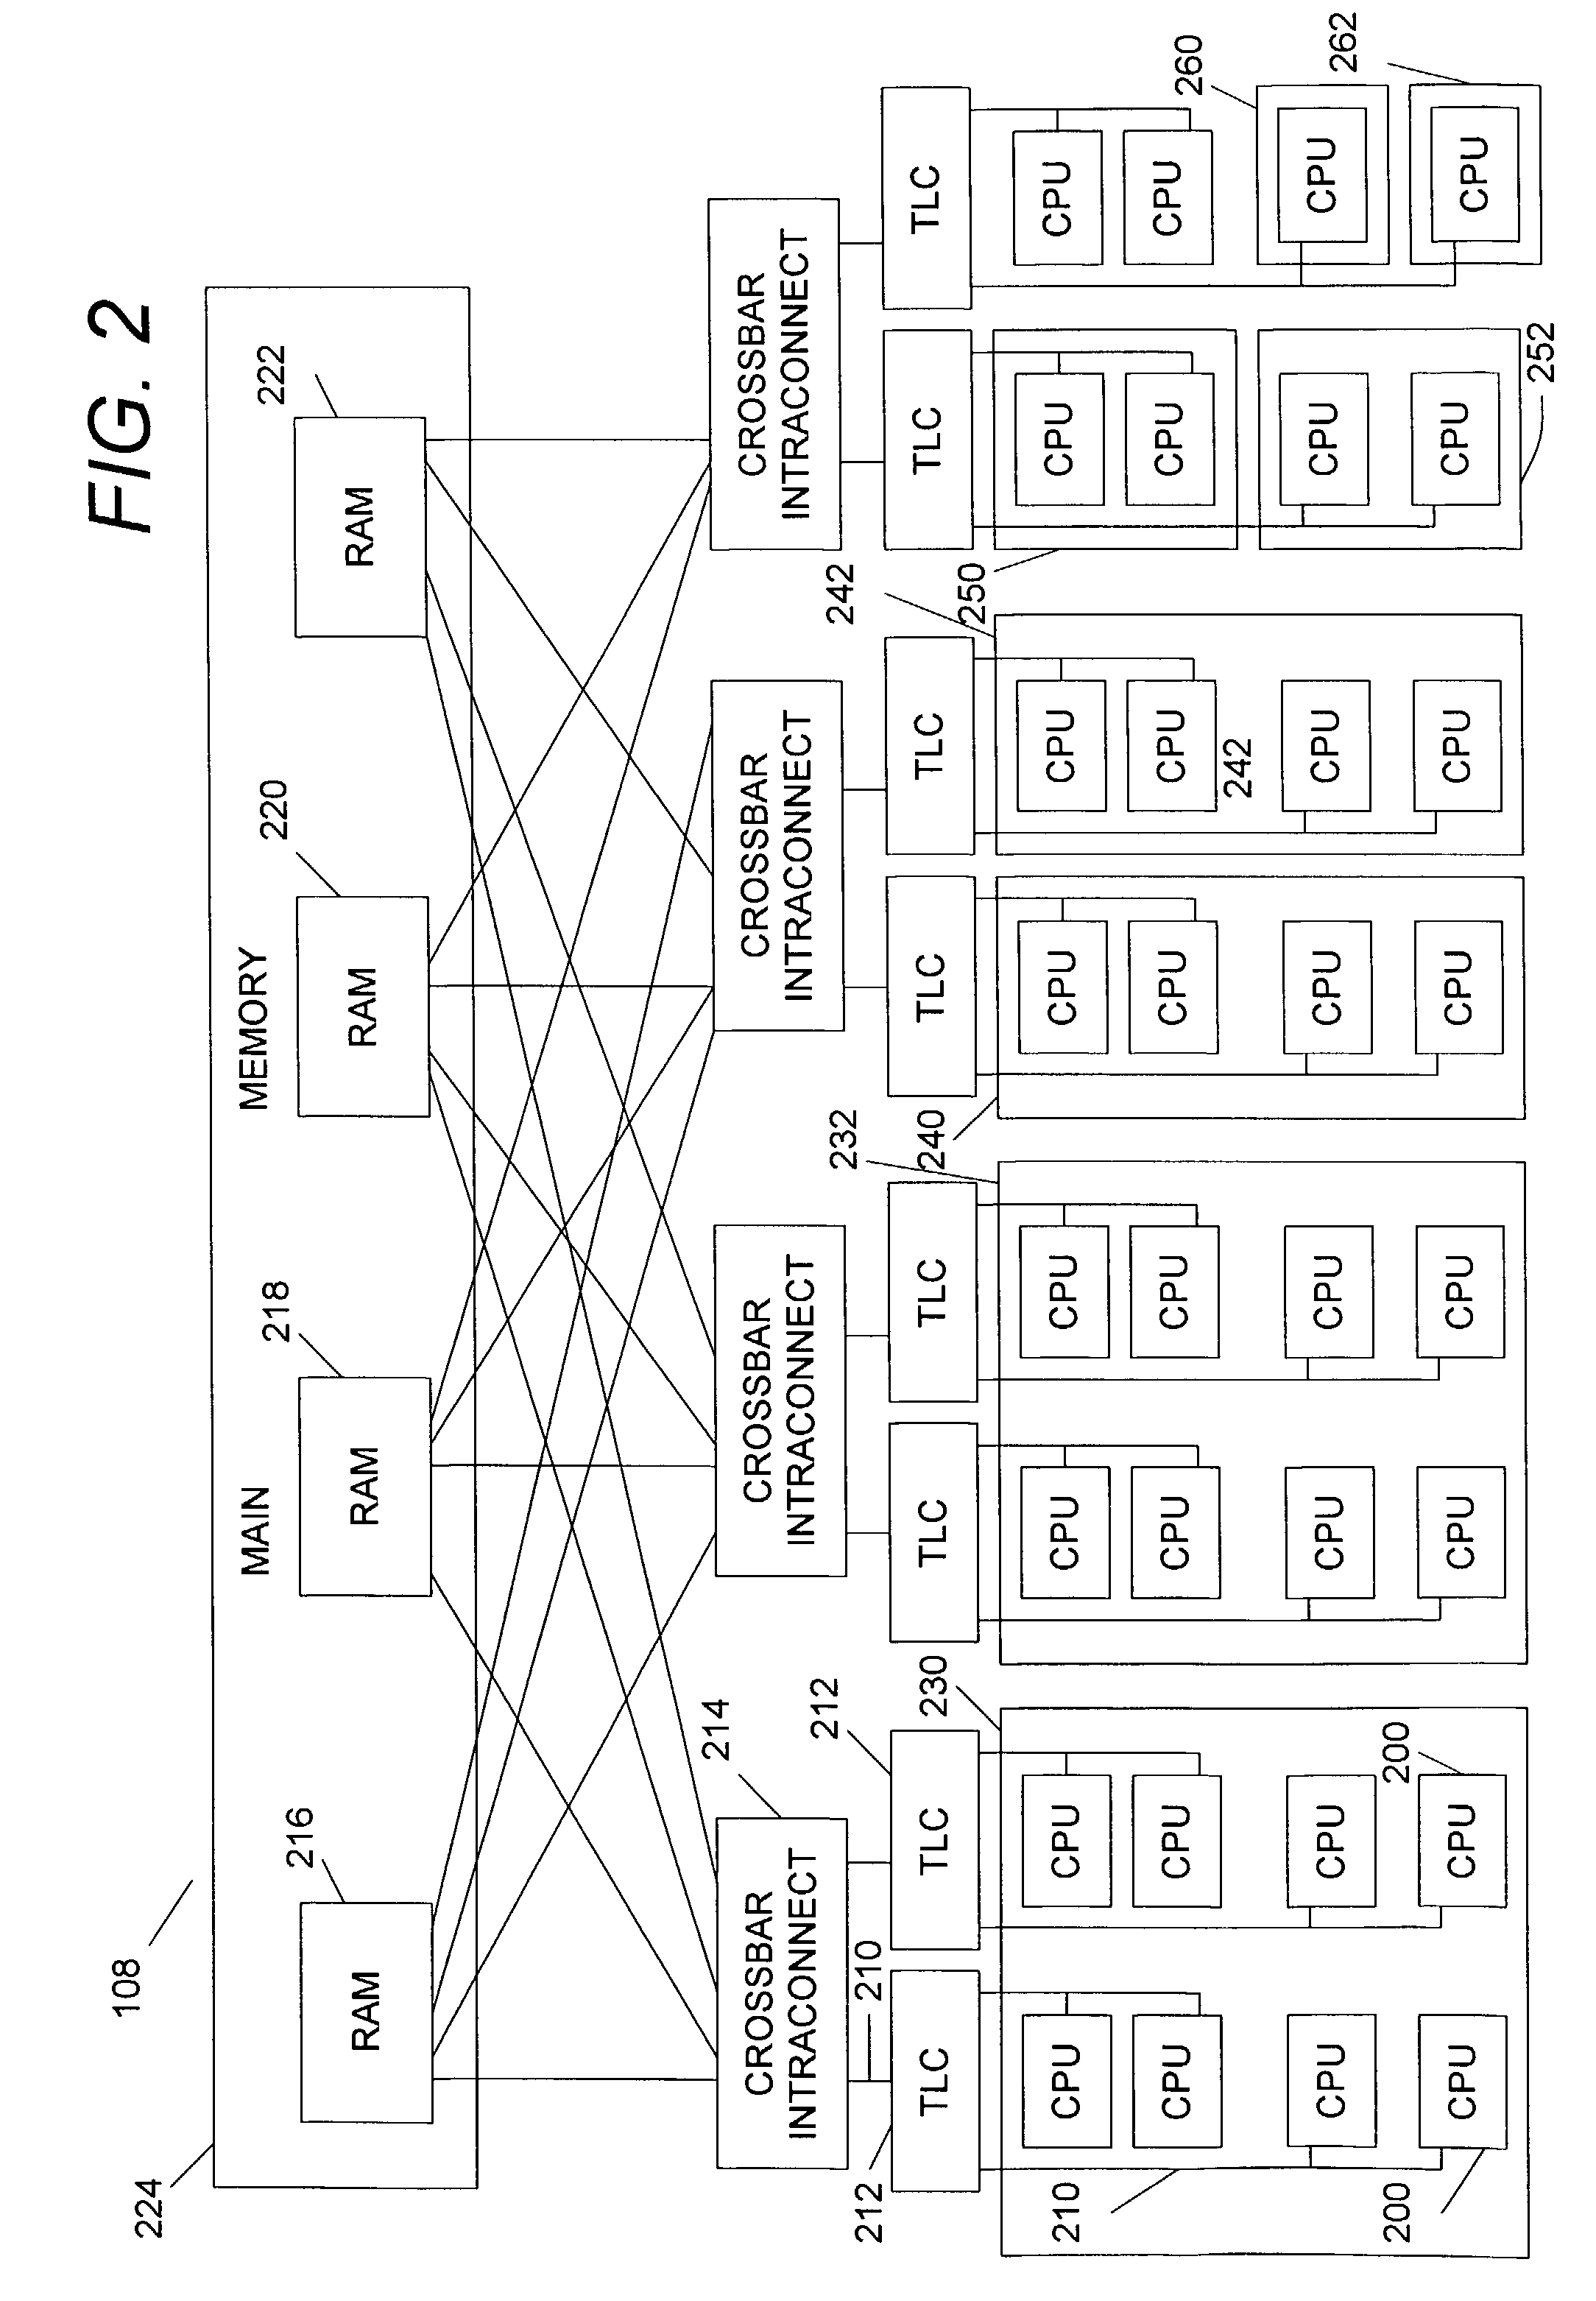 Method and system for managing distribution of computer-executable program threads between central processing units in a multi-central processing unit computer system